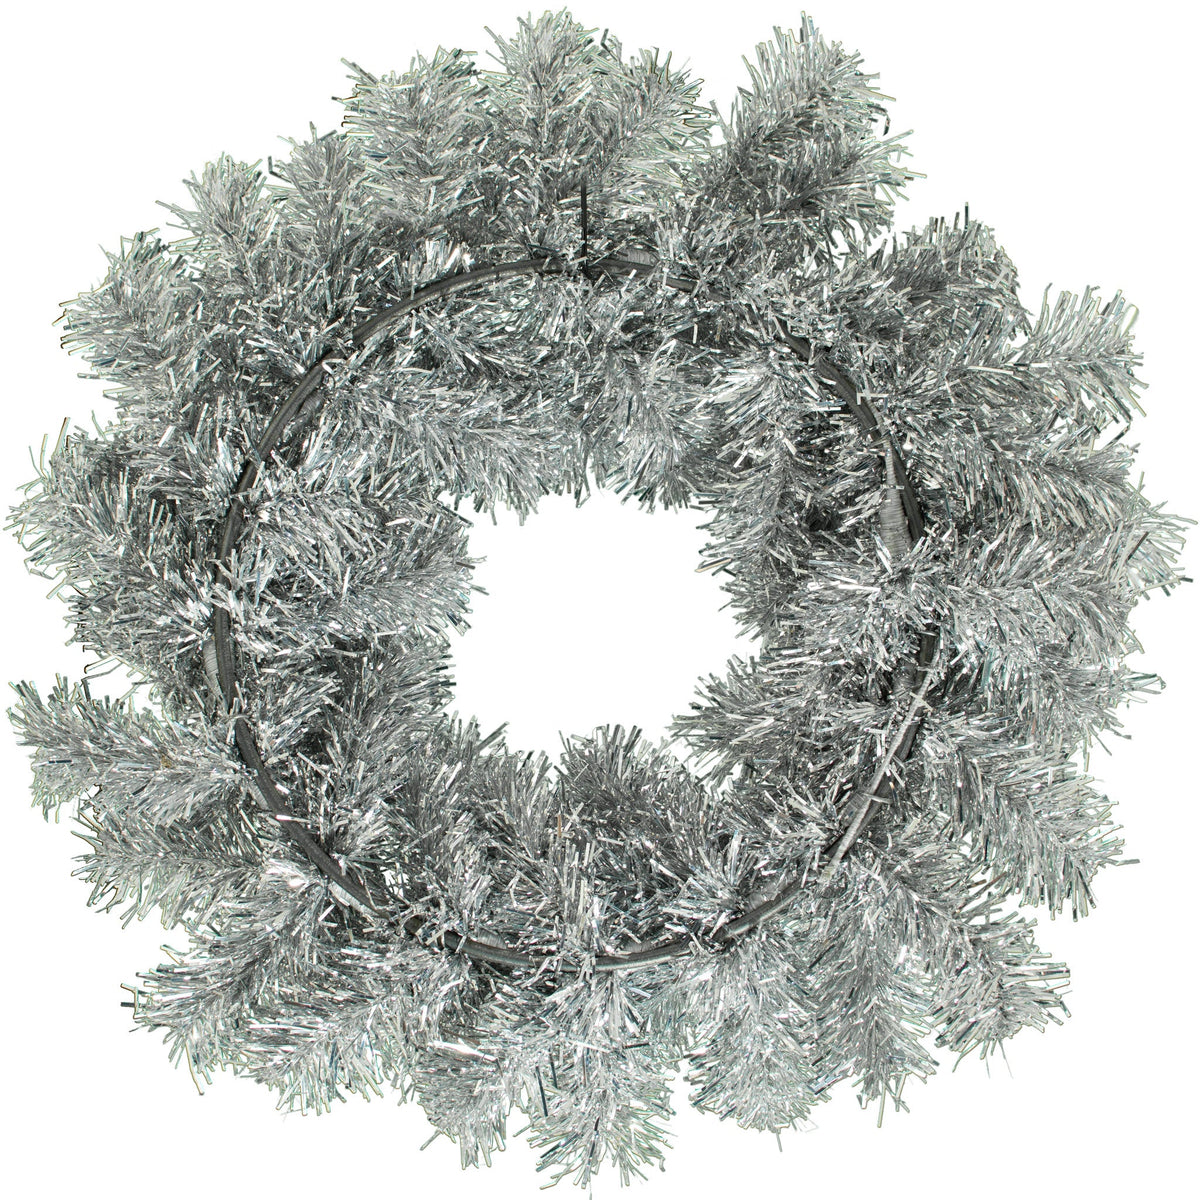 Single sided wreaths are flat on the opposite side so they lay flat against a flat surface.